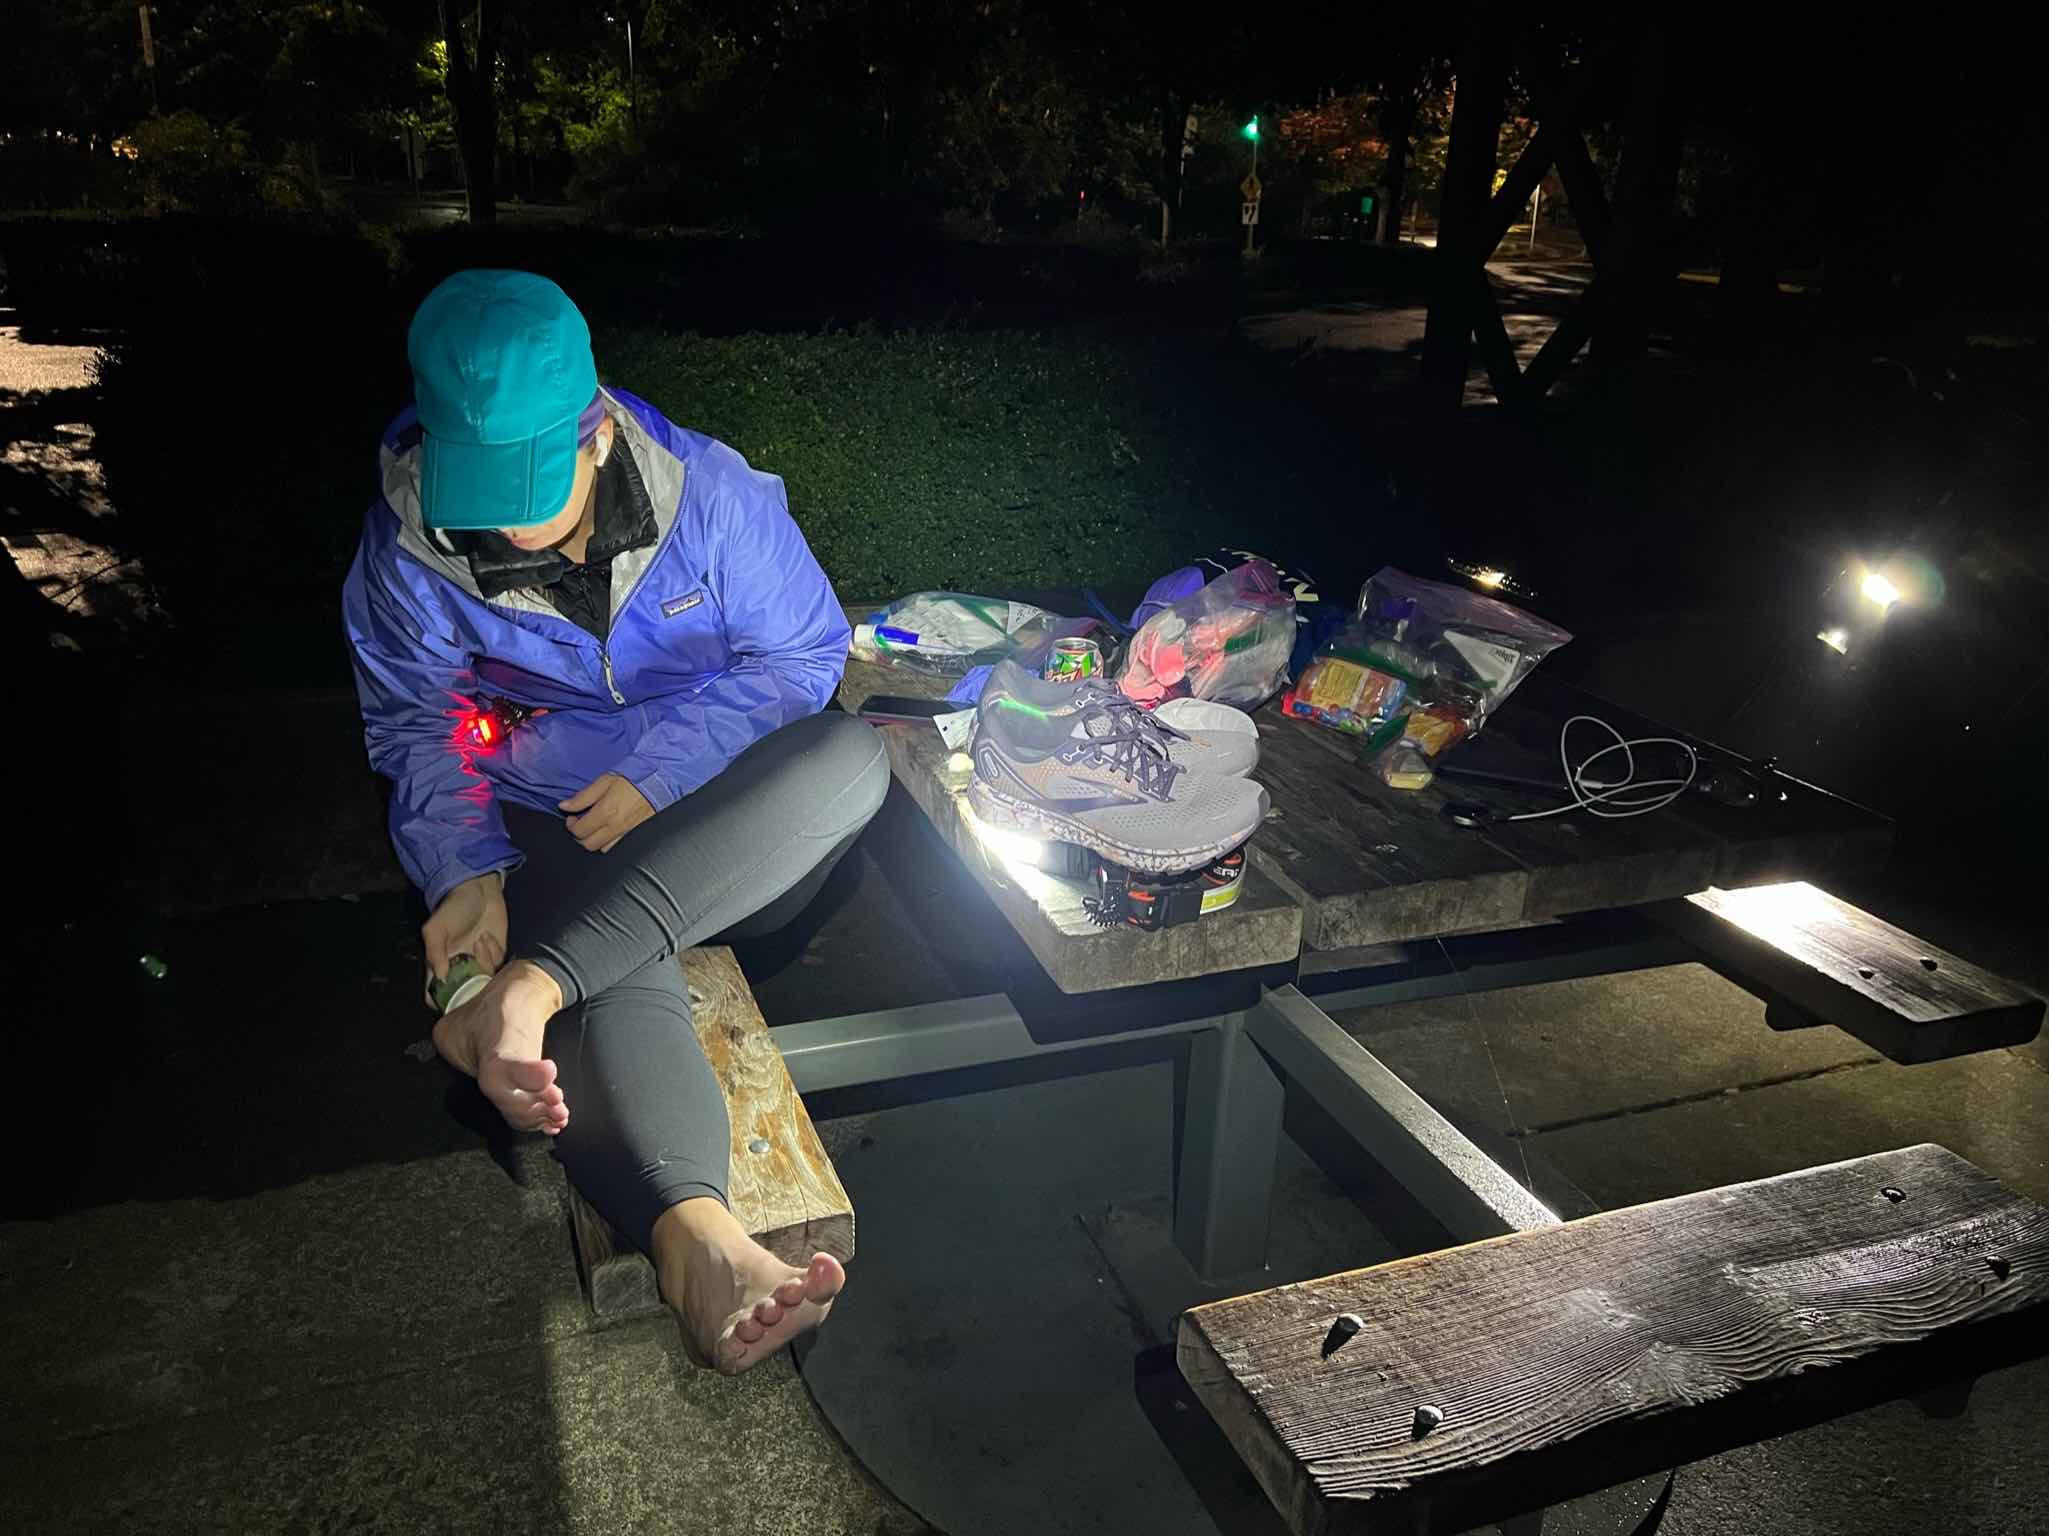 Dana sits on a bench at a picnic table in a public park. It is dark. She is wearing long rain pants, a rain jacket, and a rain hat and is bent over her bare feet, applying lubrication. It is dark and nighttime, so she has an extra waistlamp on the table illuminating her feet. Other ultrarunning supplies are strewn across the table.